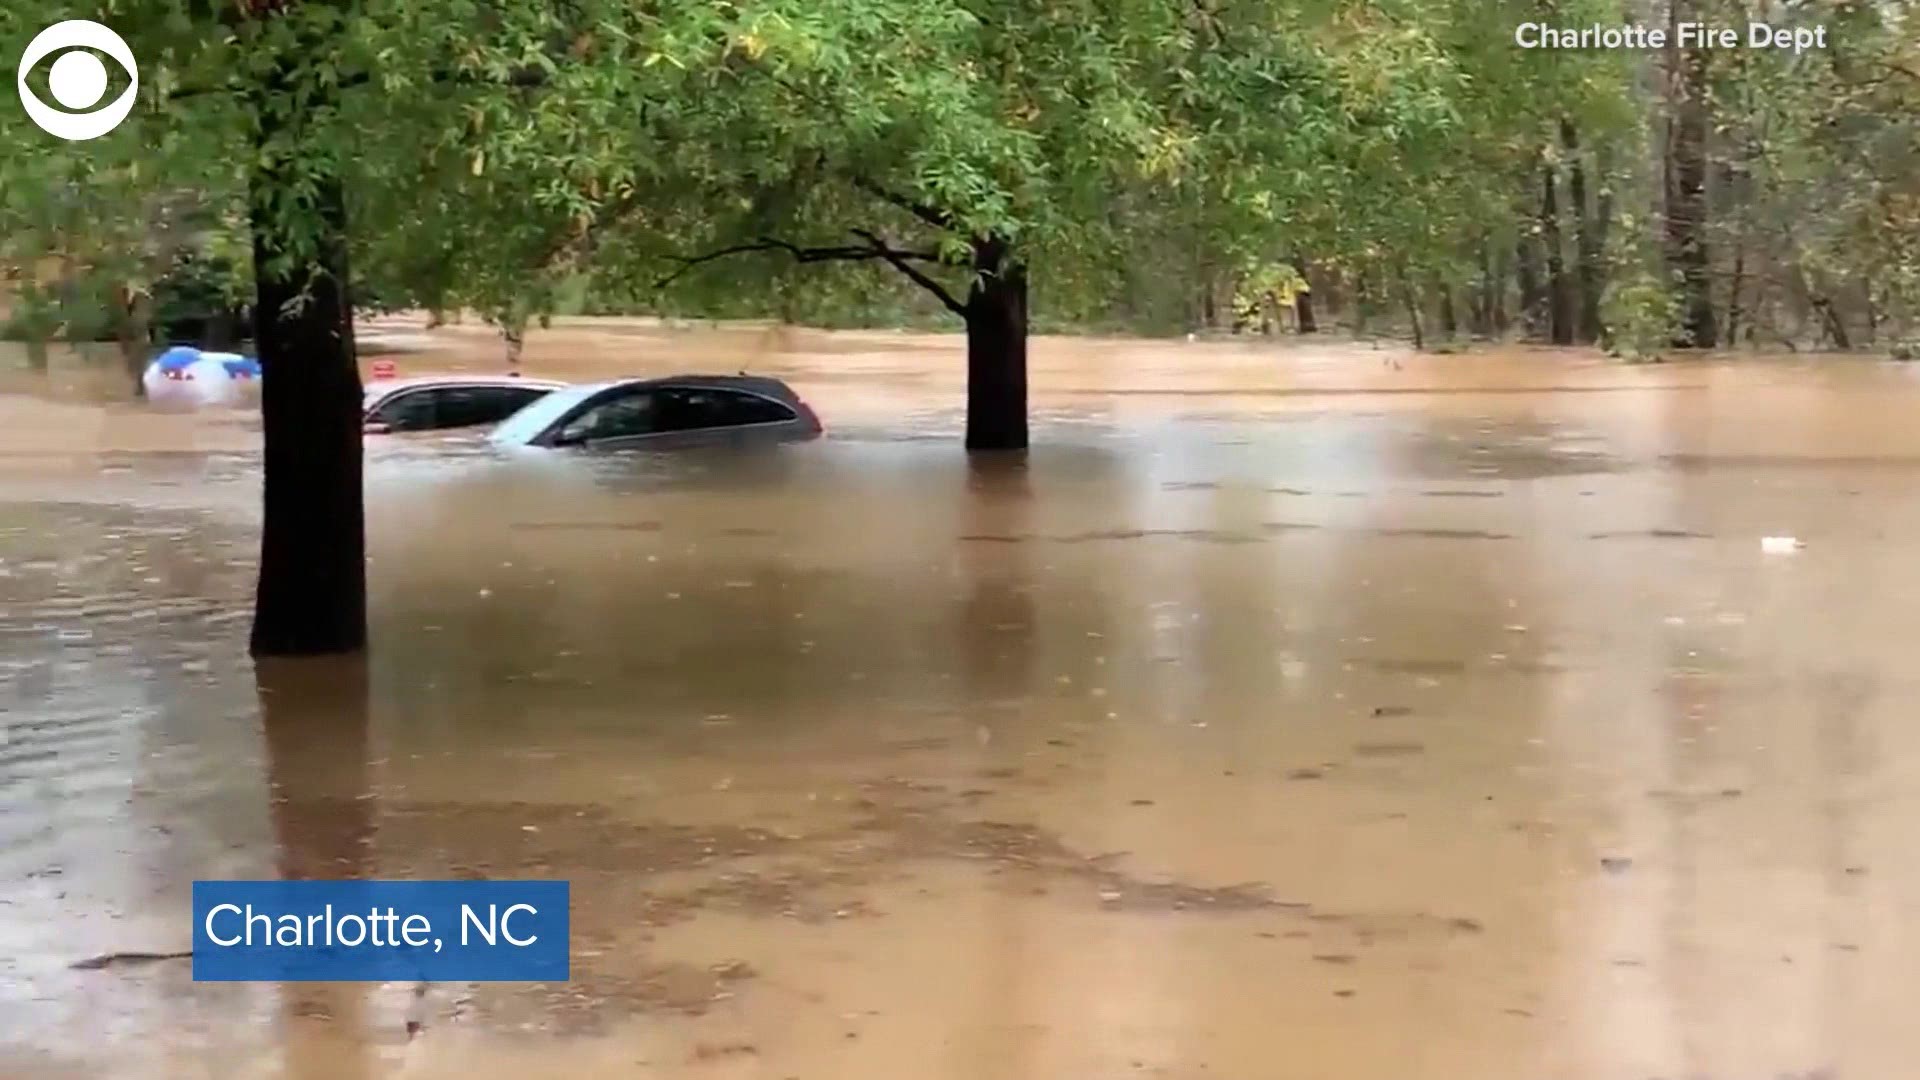 An elementary school in Charlotte, North Carolina was evacuated because of flooding Thursday.